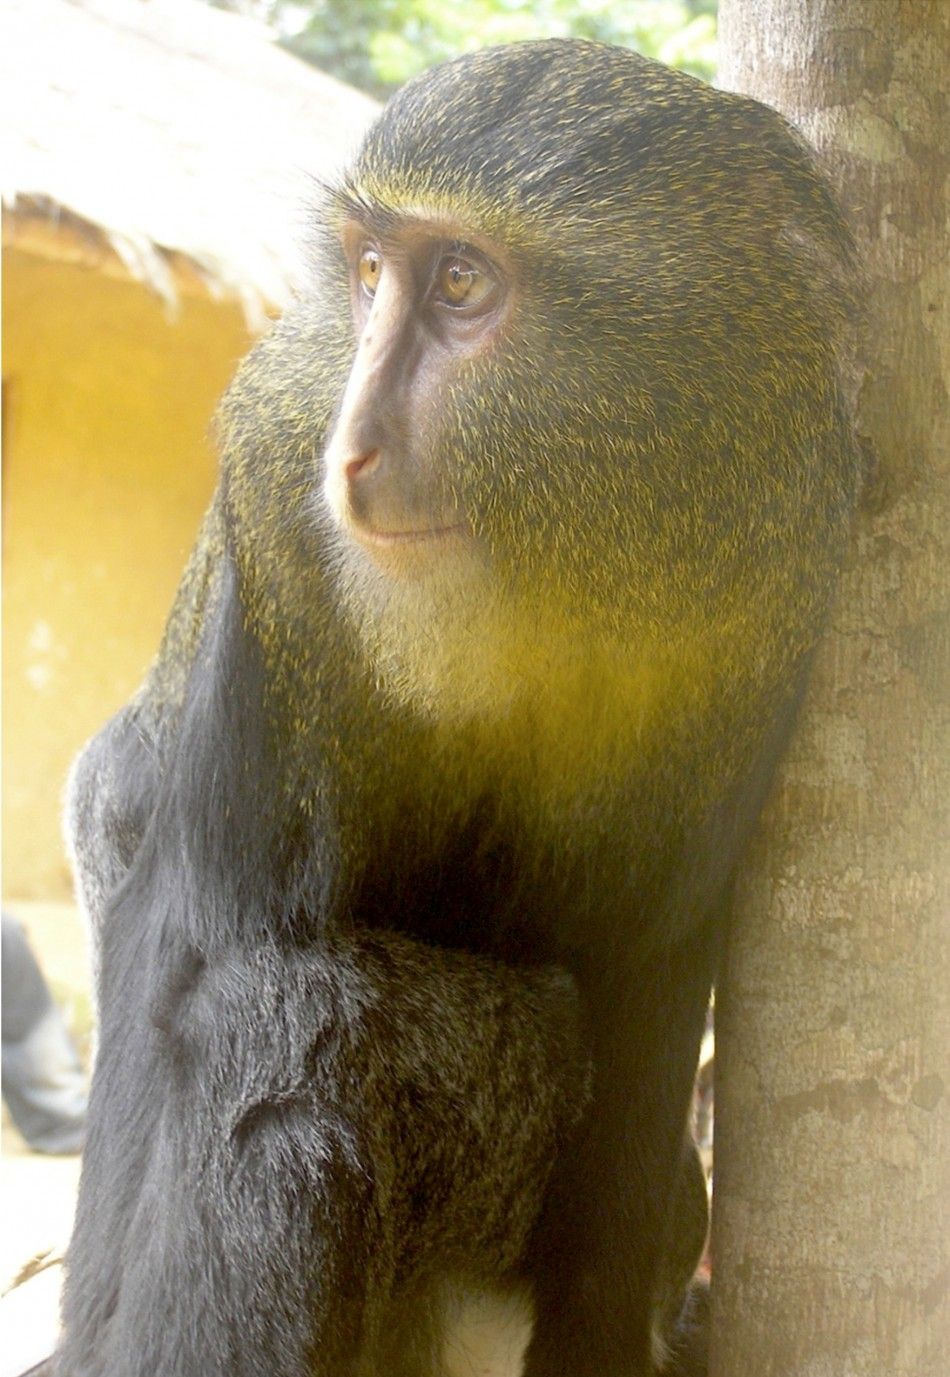 New Species of Monkey With Unusual Coloring and quotHuman Likequot Eyes Found in Congo